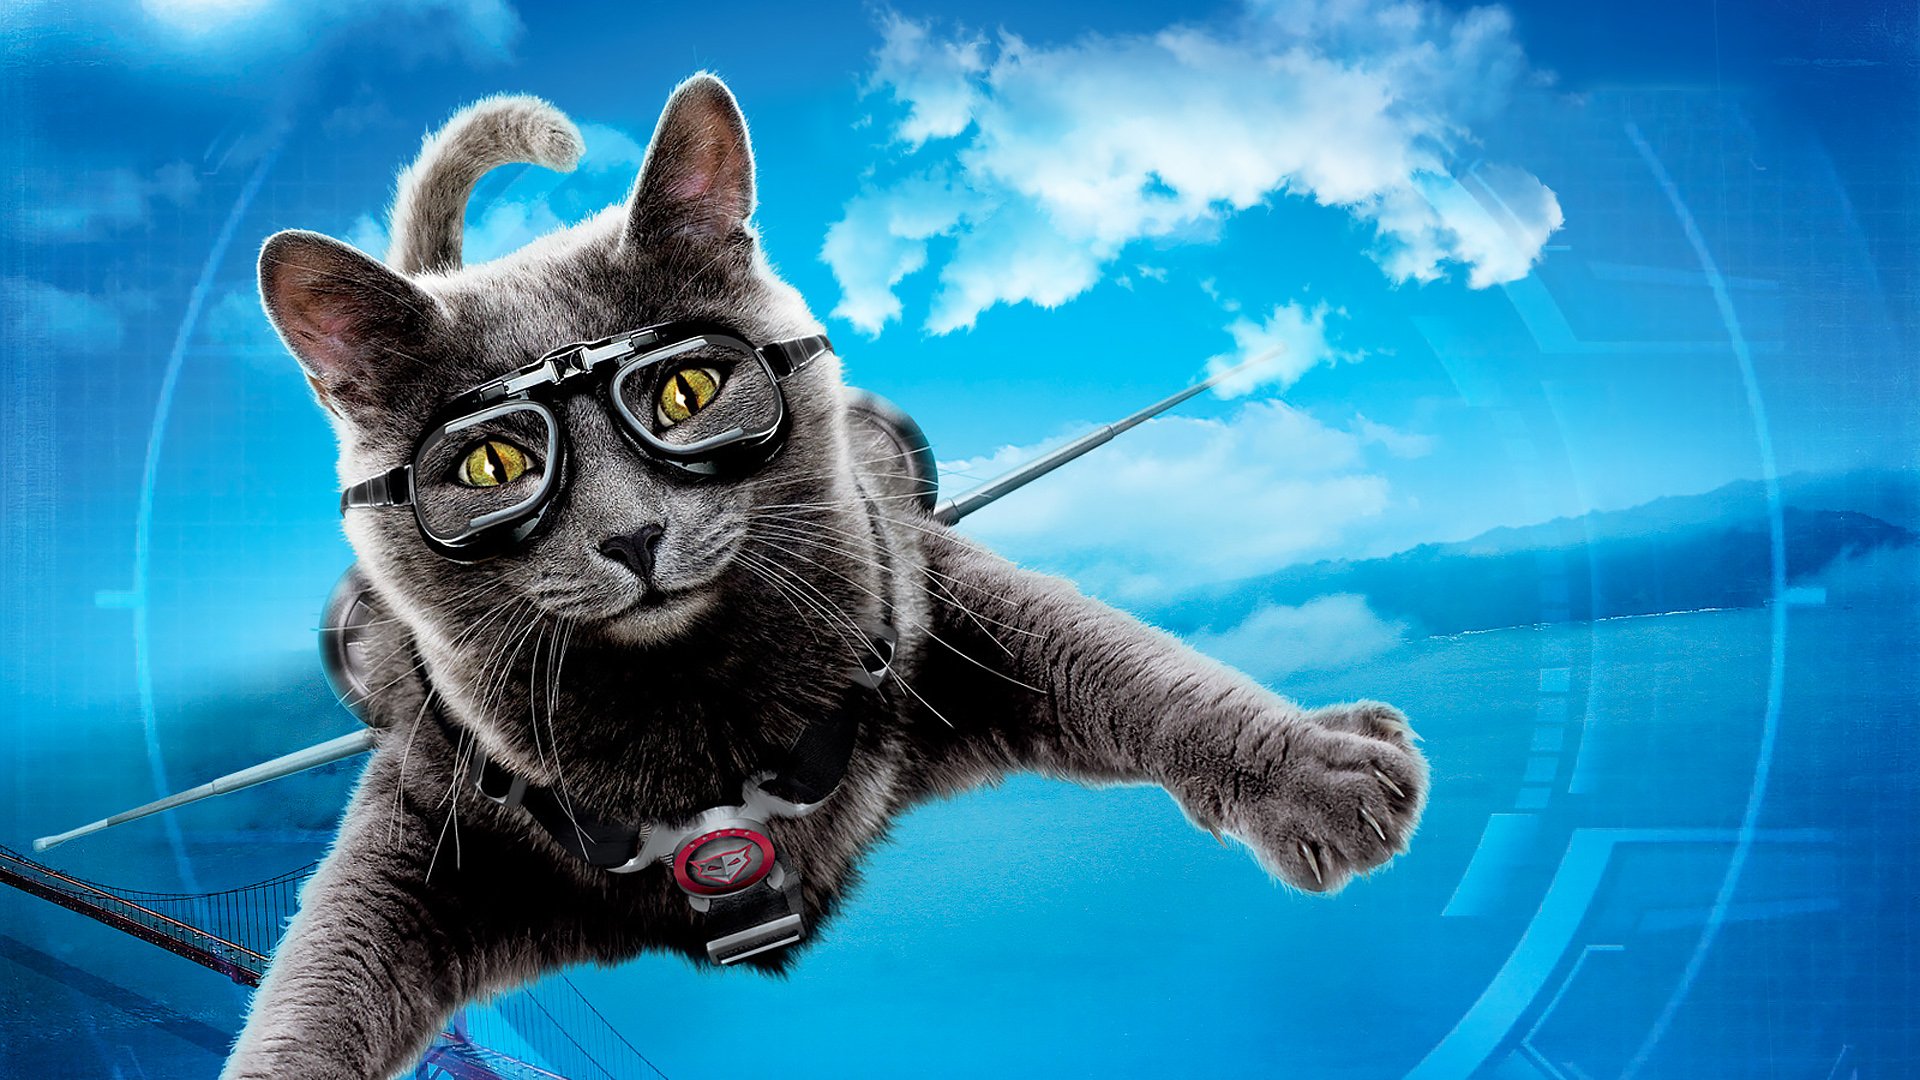 Download Movie Cats & Dogs: The Revenge Of Kitty Galore  HD Wallpaper